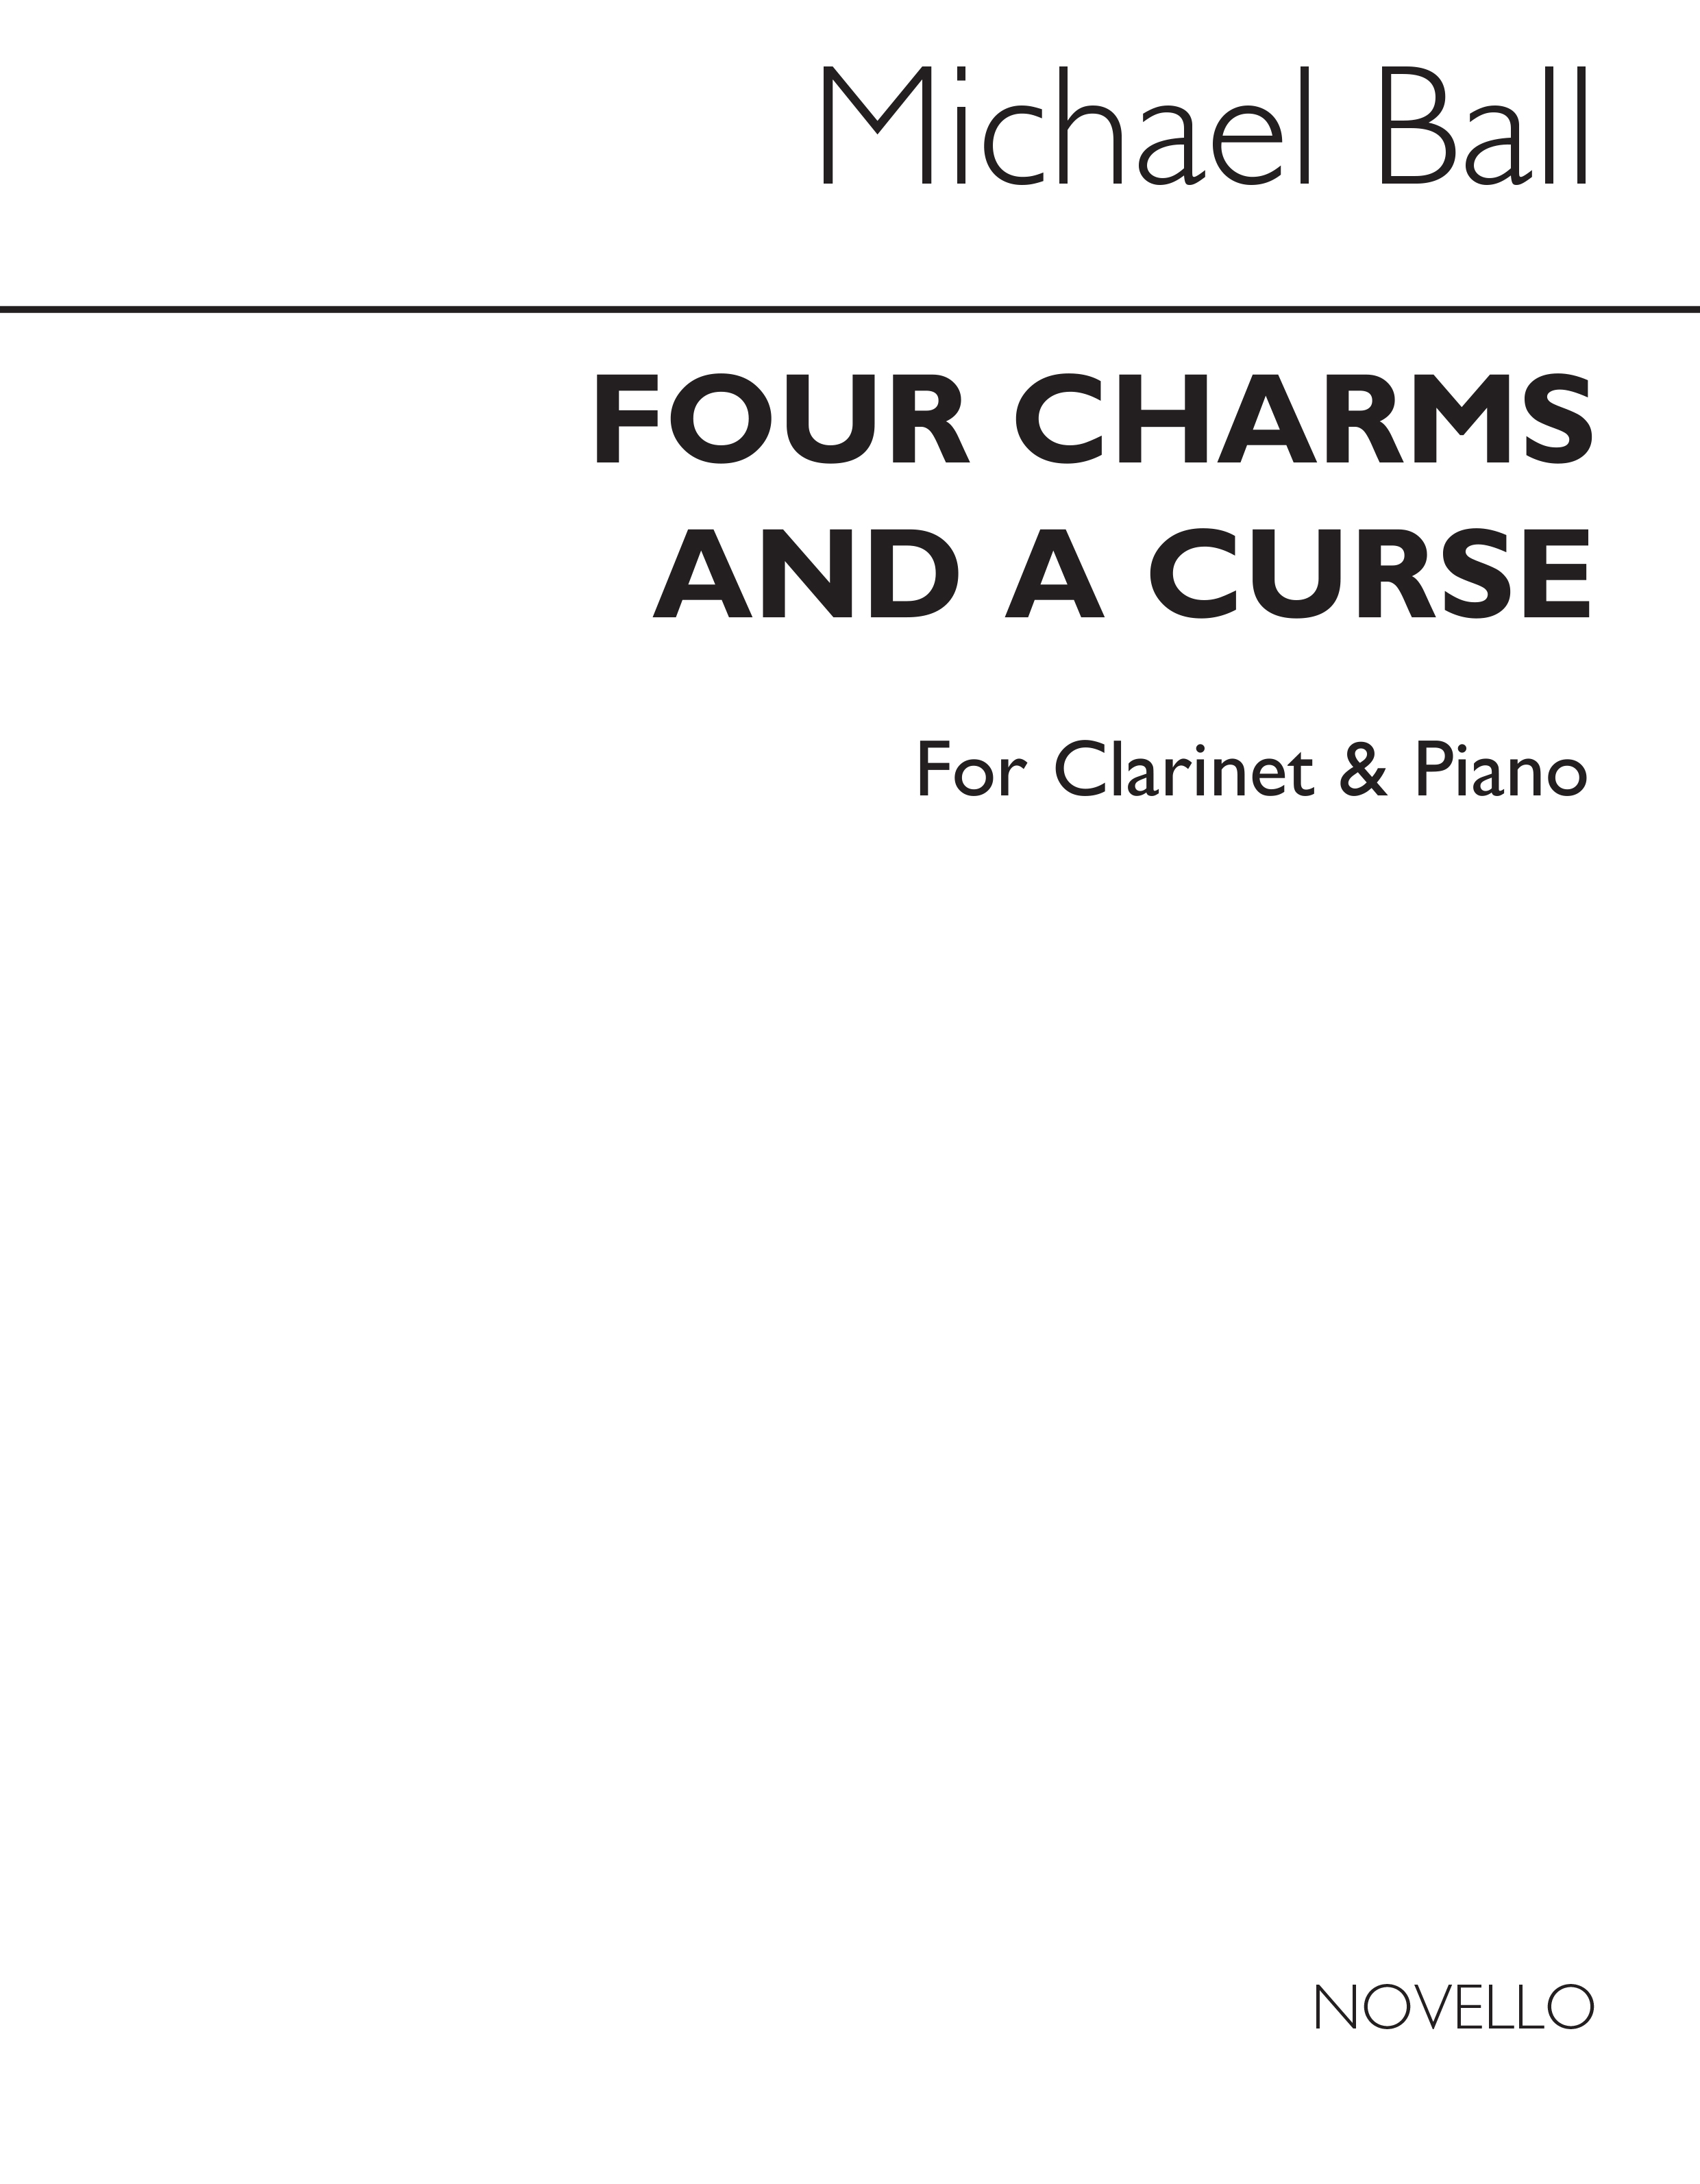 Ball: Four Charms And A Curse for Clarinet and Piano